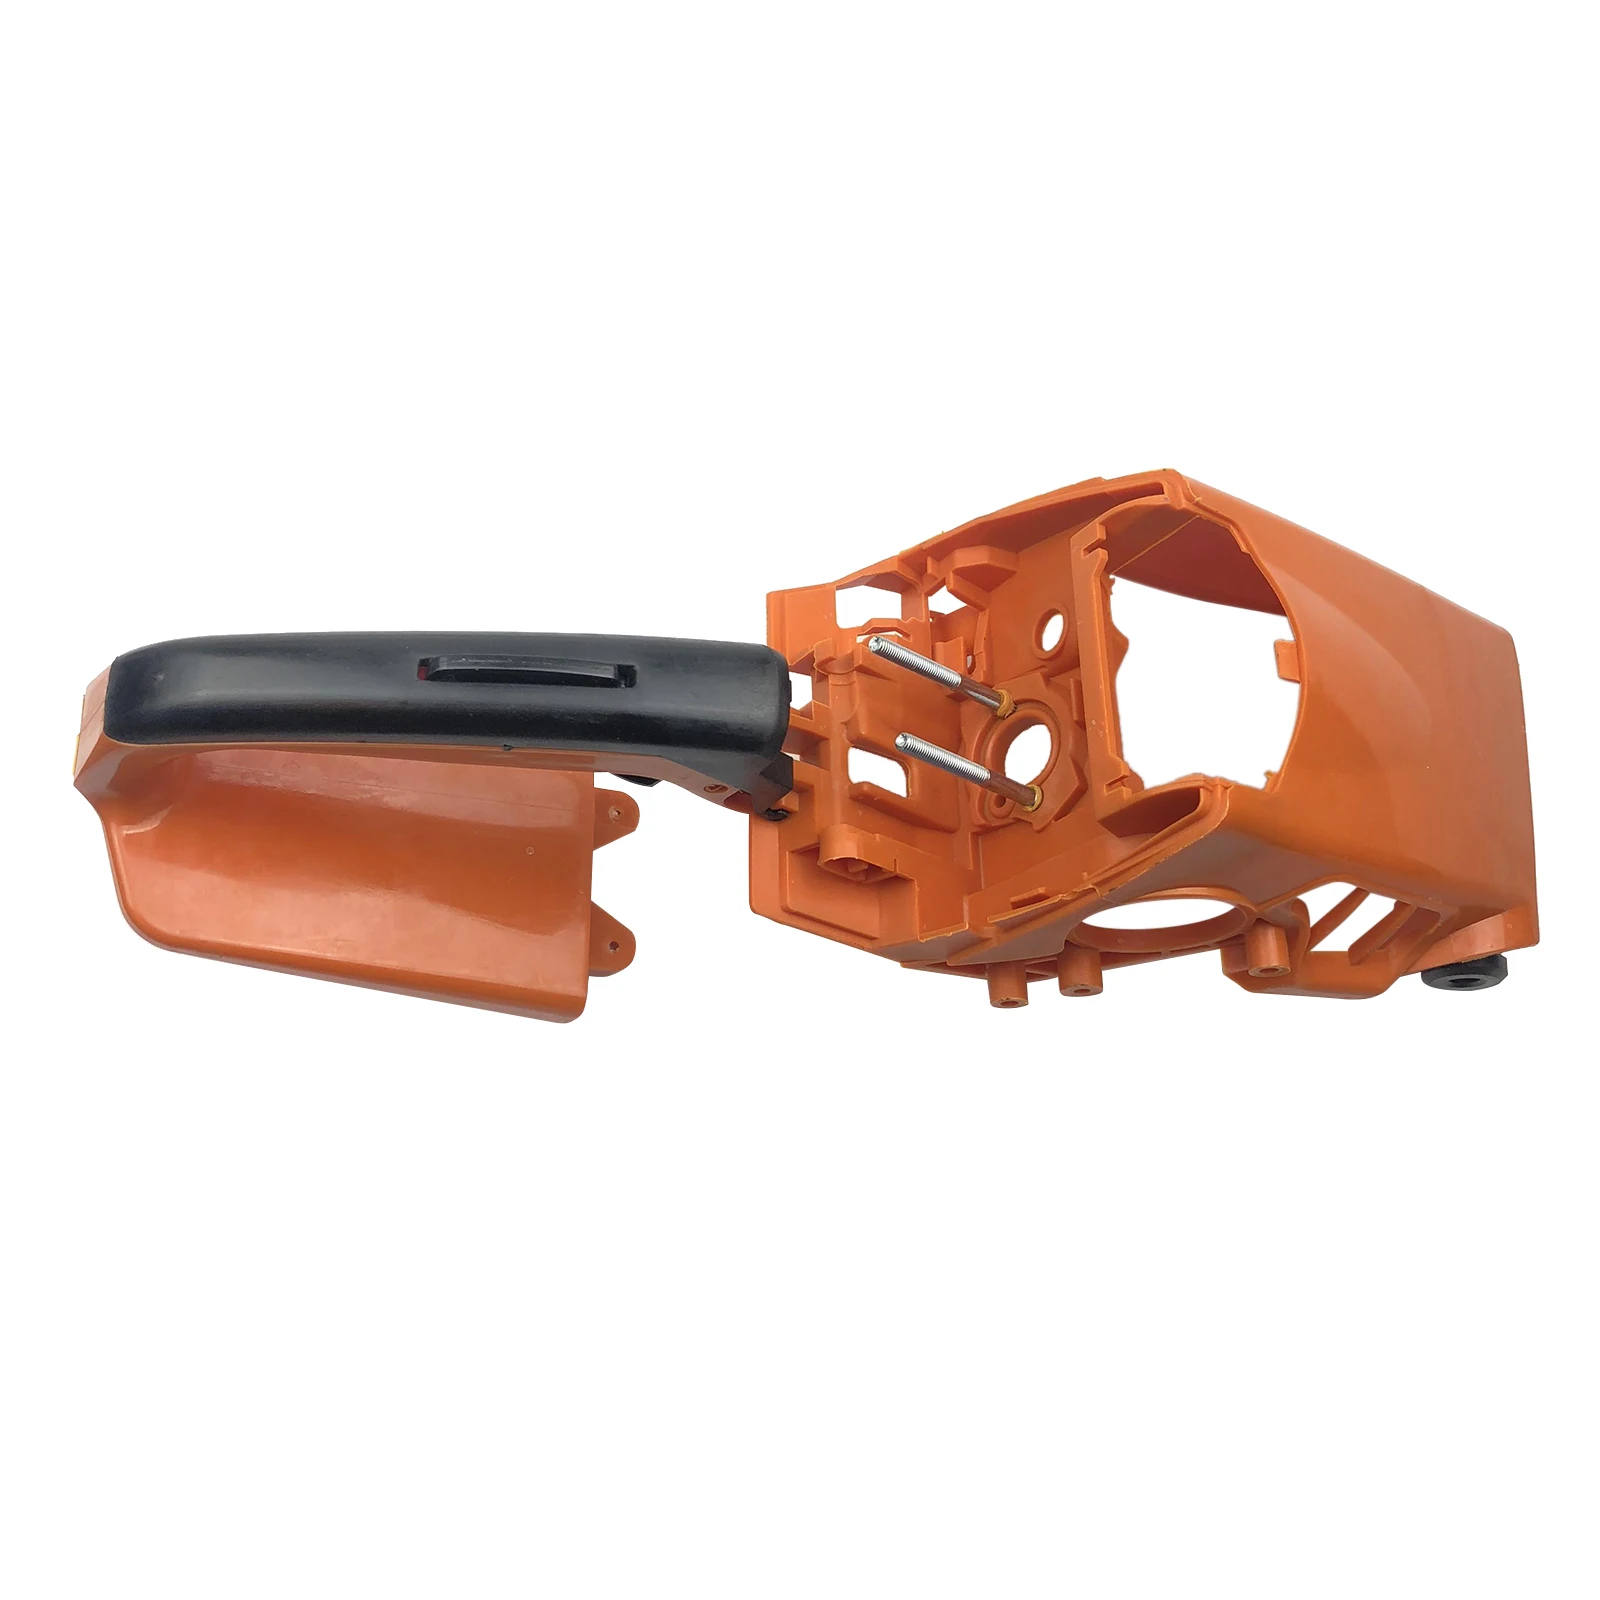 Back Handle and Cylinder Cover Fits for STIHL 021 023 025 MS210 MS230 MS250 Chainsaws Accessories